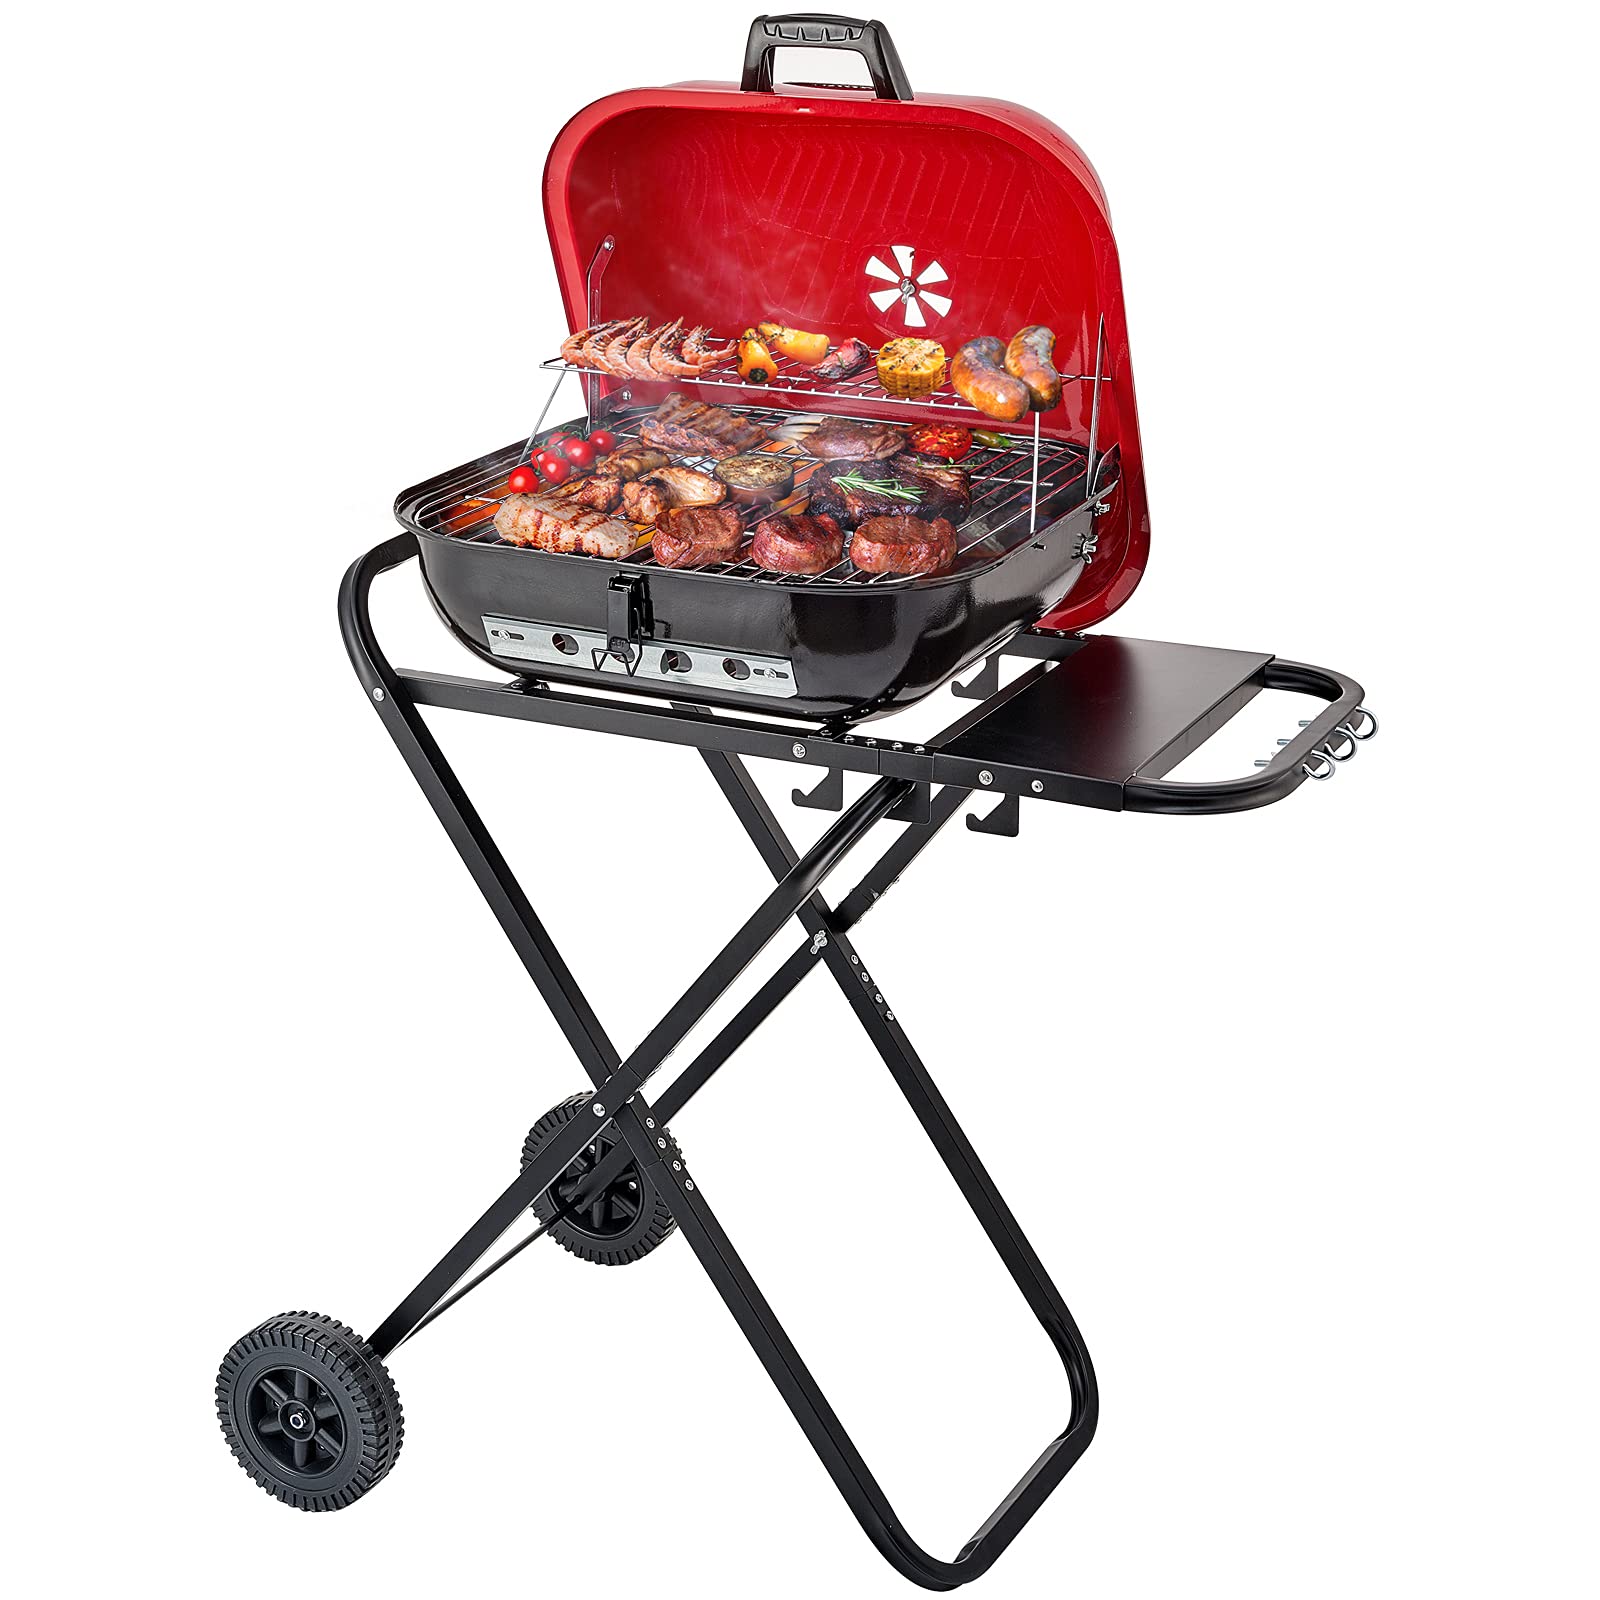 Cusimax 18.5 Inch Red Portable Folding Charcoal Grill-Cusimax